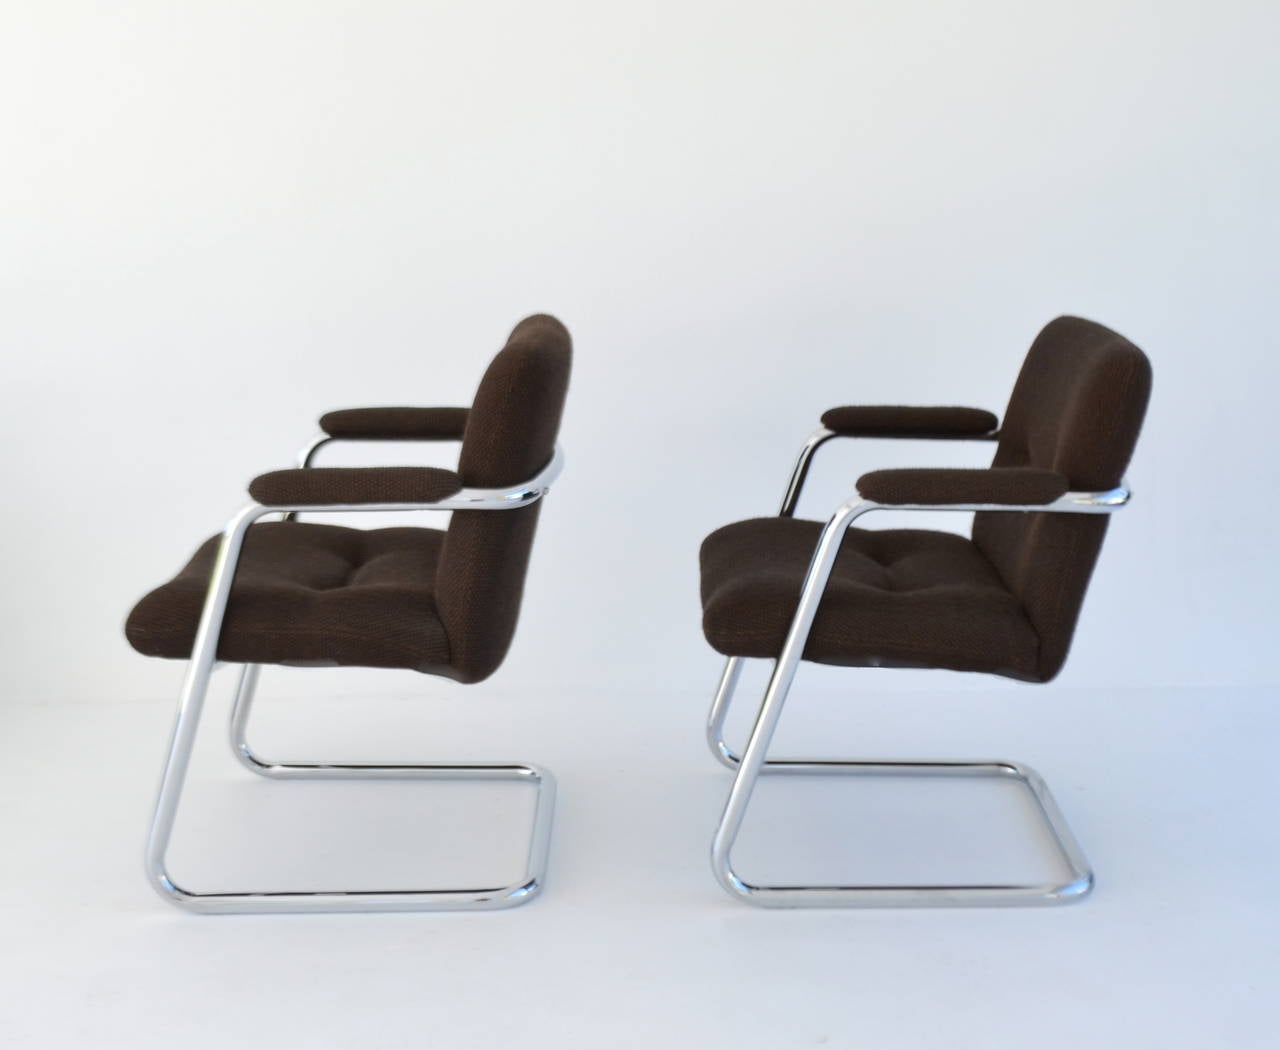 Late 20th Century Pair of Mid-Century Lounge Chairs